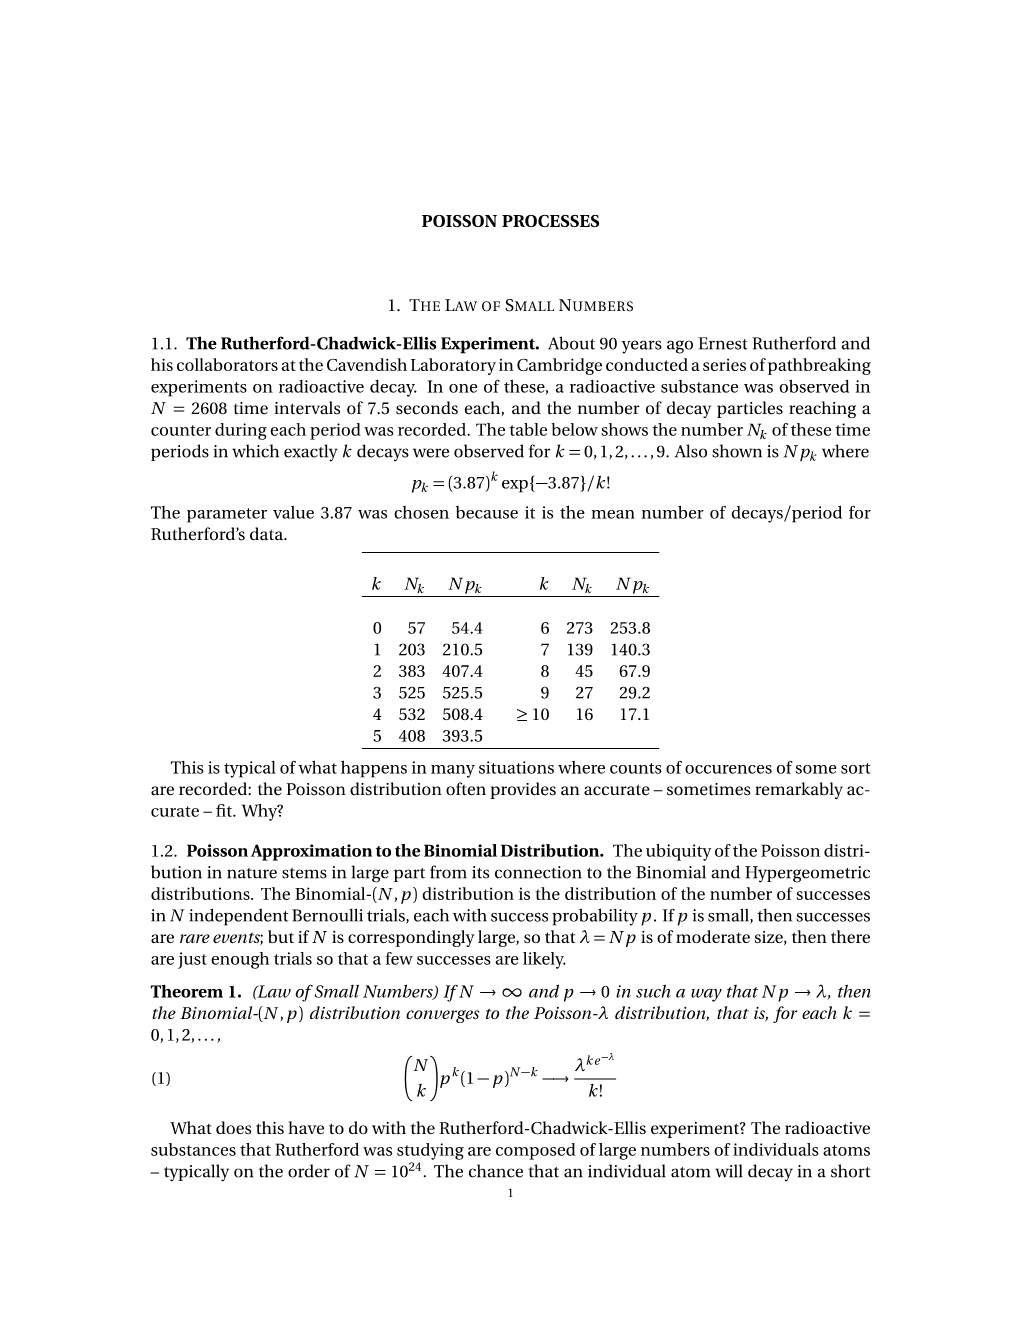 POISSON PROCESSES 1.1. the Rutherford-Chadwick-Ellis